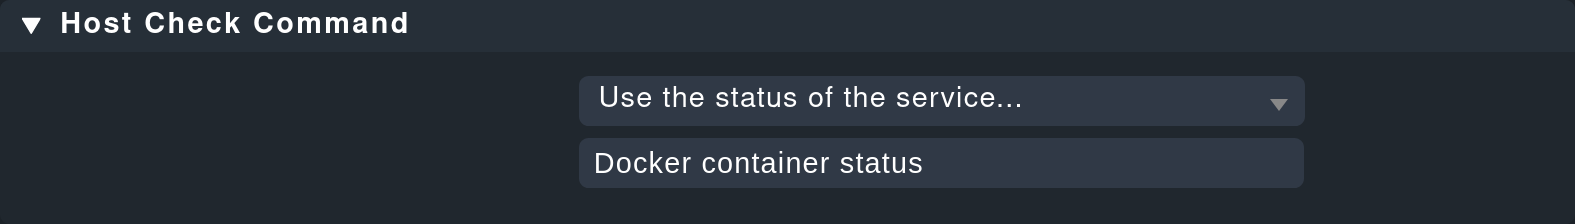 Rule for the command to check the host status of the containers.